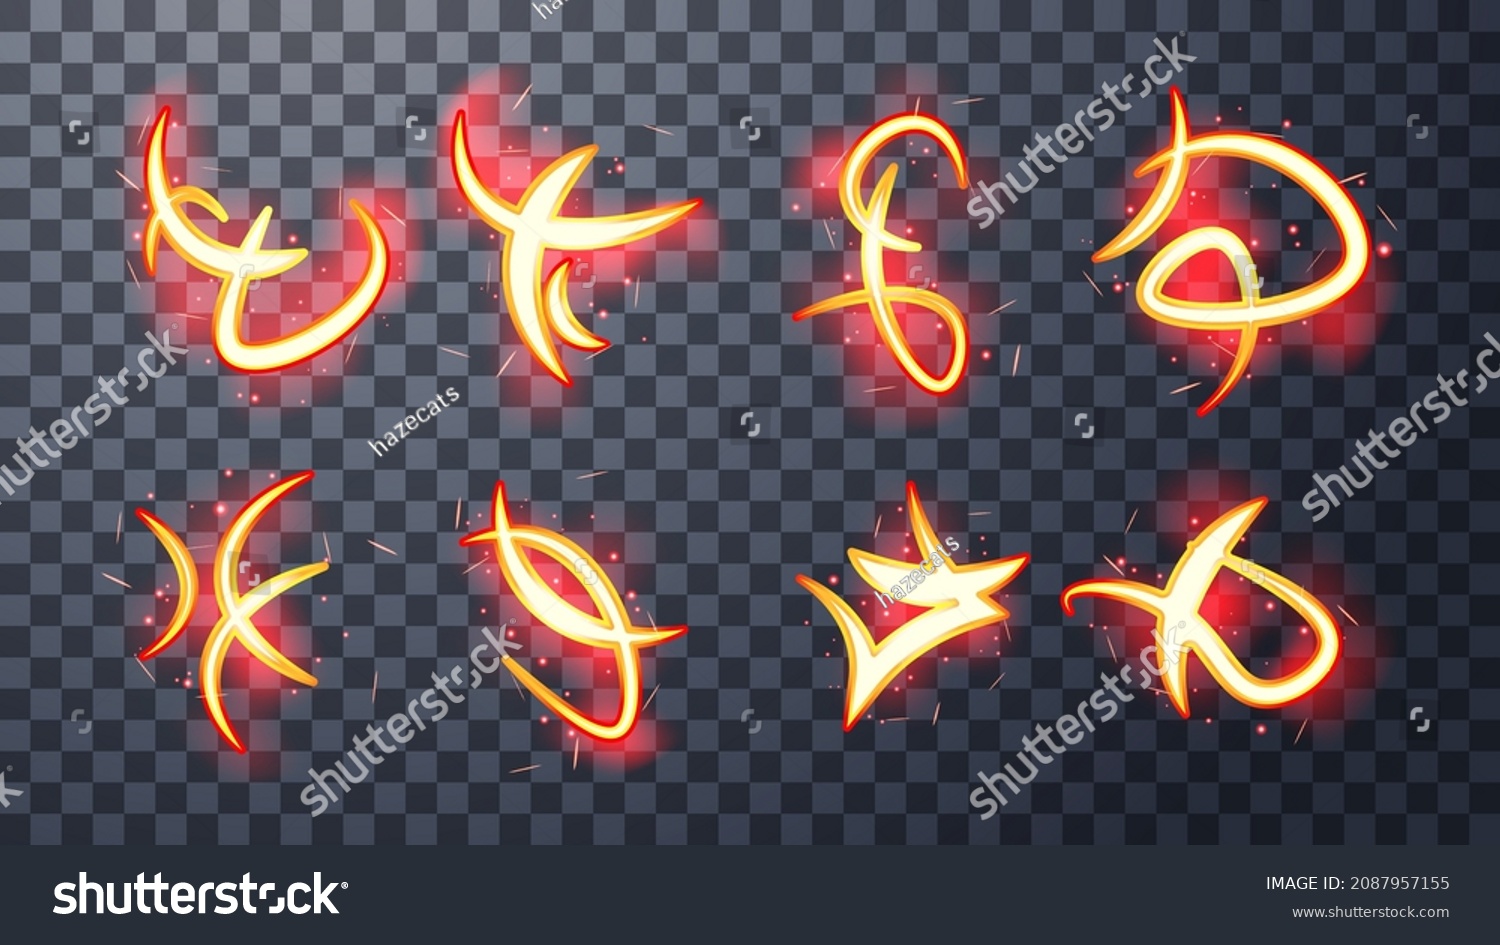 SVG of Modern magic witchcraft symbols. Ethereal fire runes with sparks and strange forms. Decor elements for magic doctor, shaman, medium. Luminous trail effect on transparent background. svg